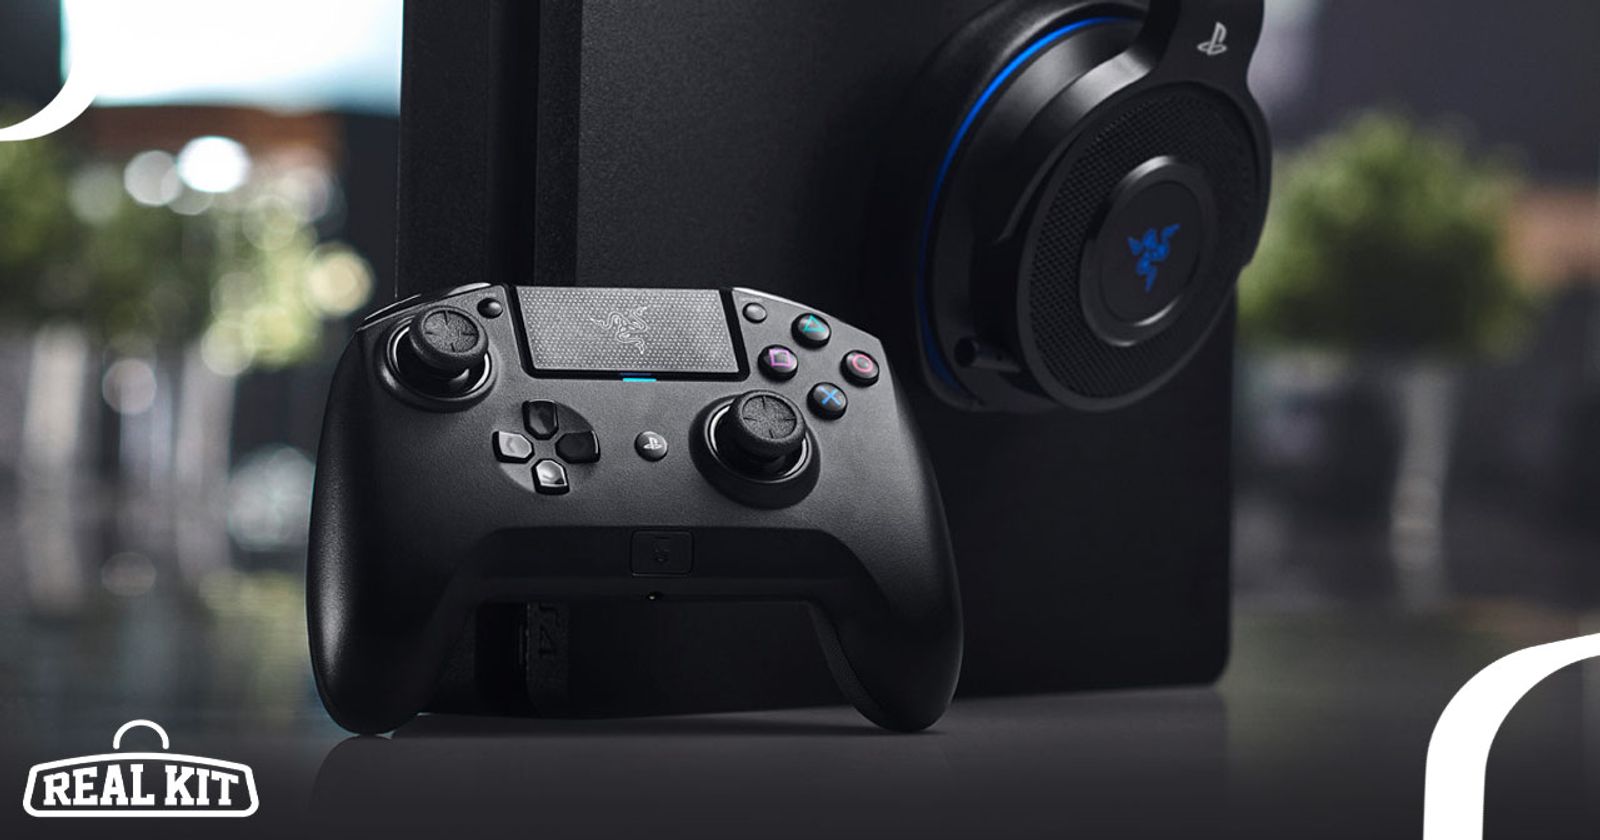 The best PS4 controllers you can buy in 2023